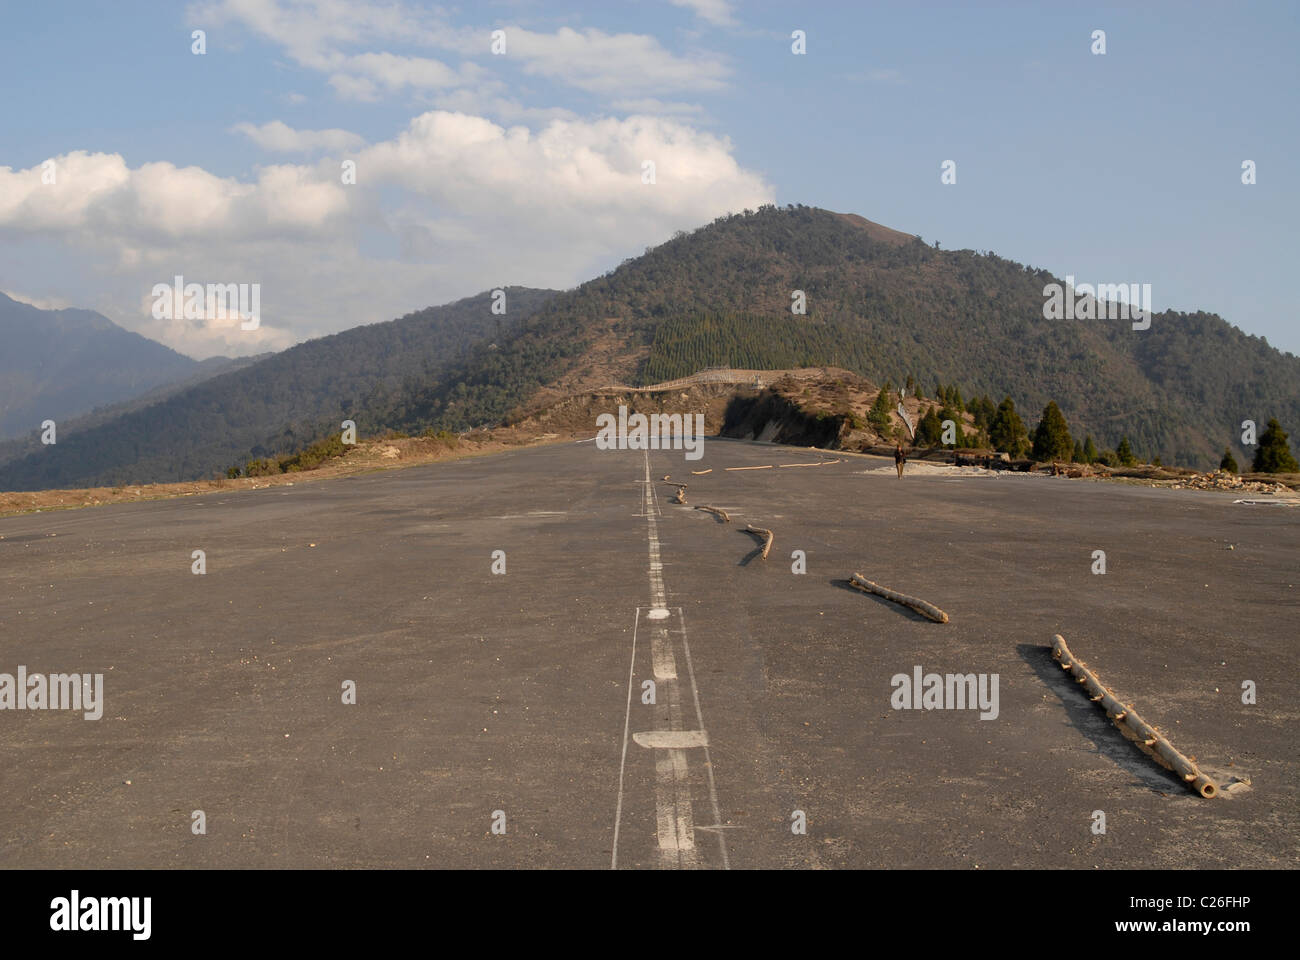 Construction work at the new Runway / Airport above Trashigang, East Bhutan Stock Photo